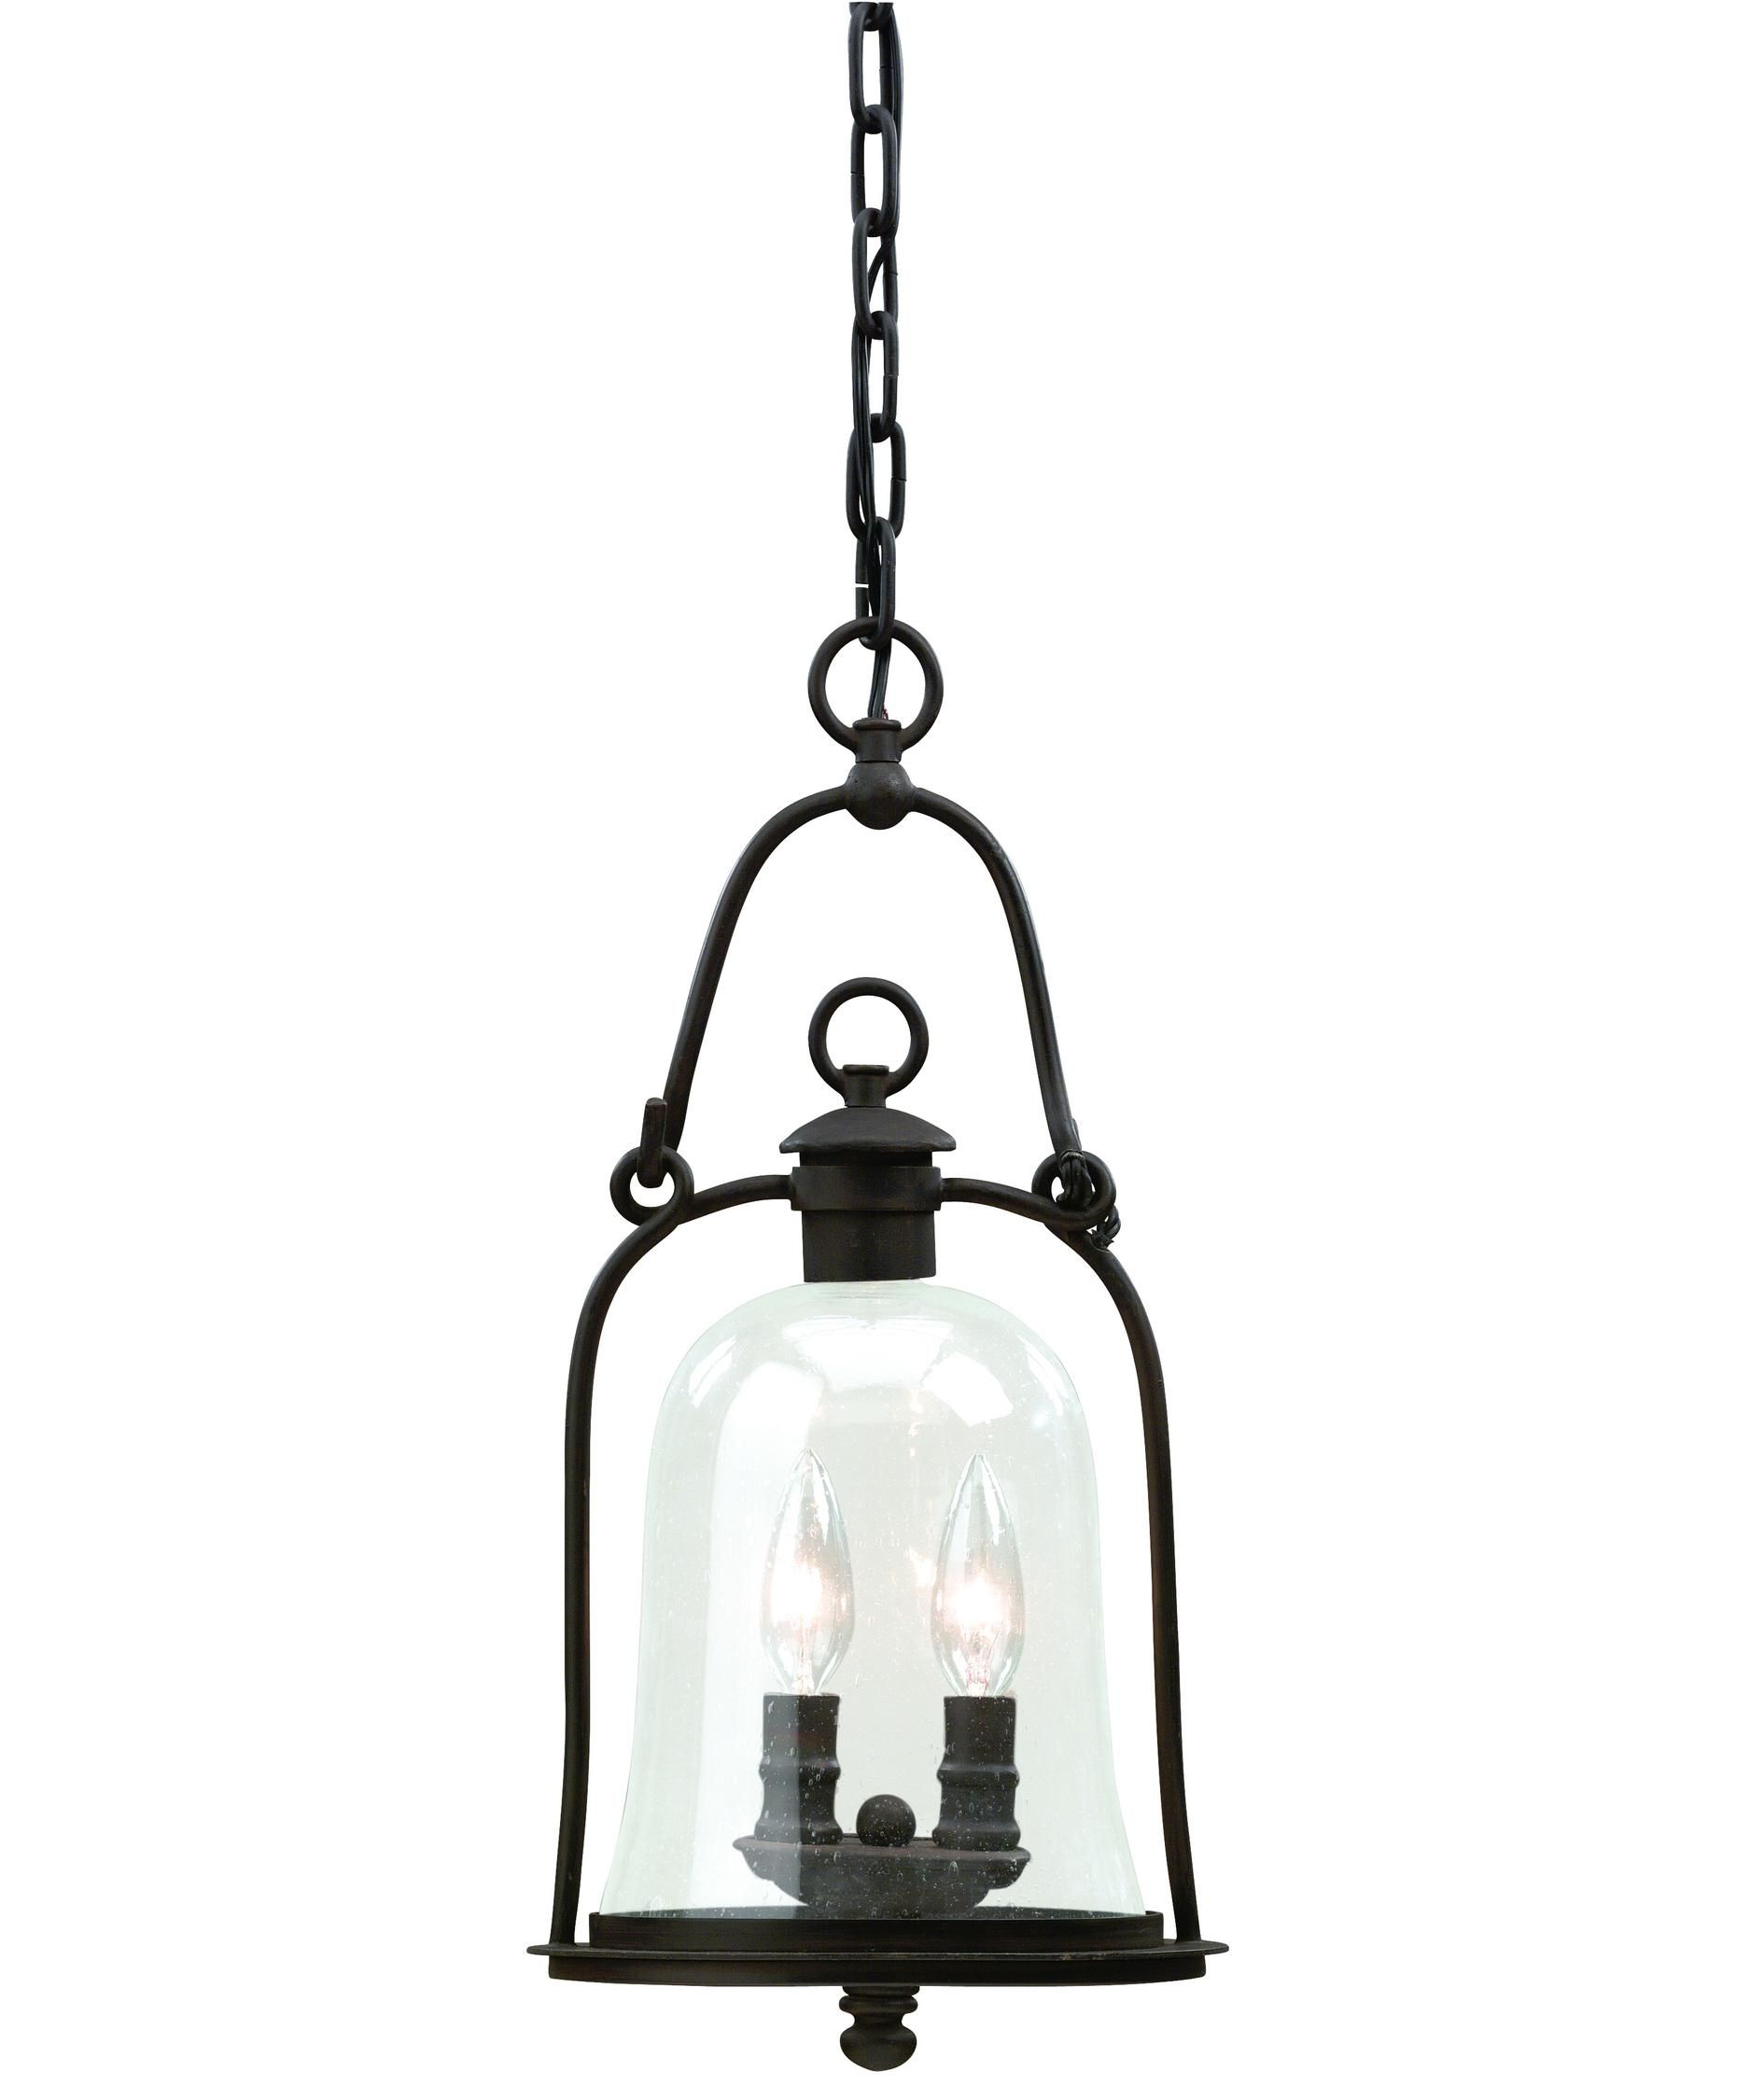 Troy Lighting F9466 Owings Mill 9 Inch Wide 2 Light Outdoor Hanging Throughout Quality Outdoor Lanterns (View 10 of 20)